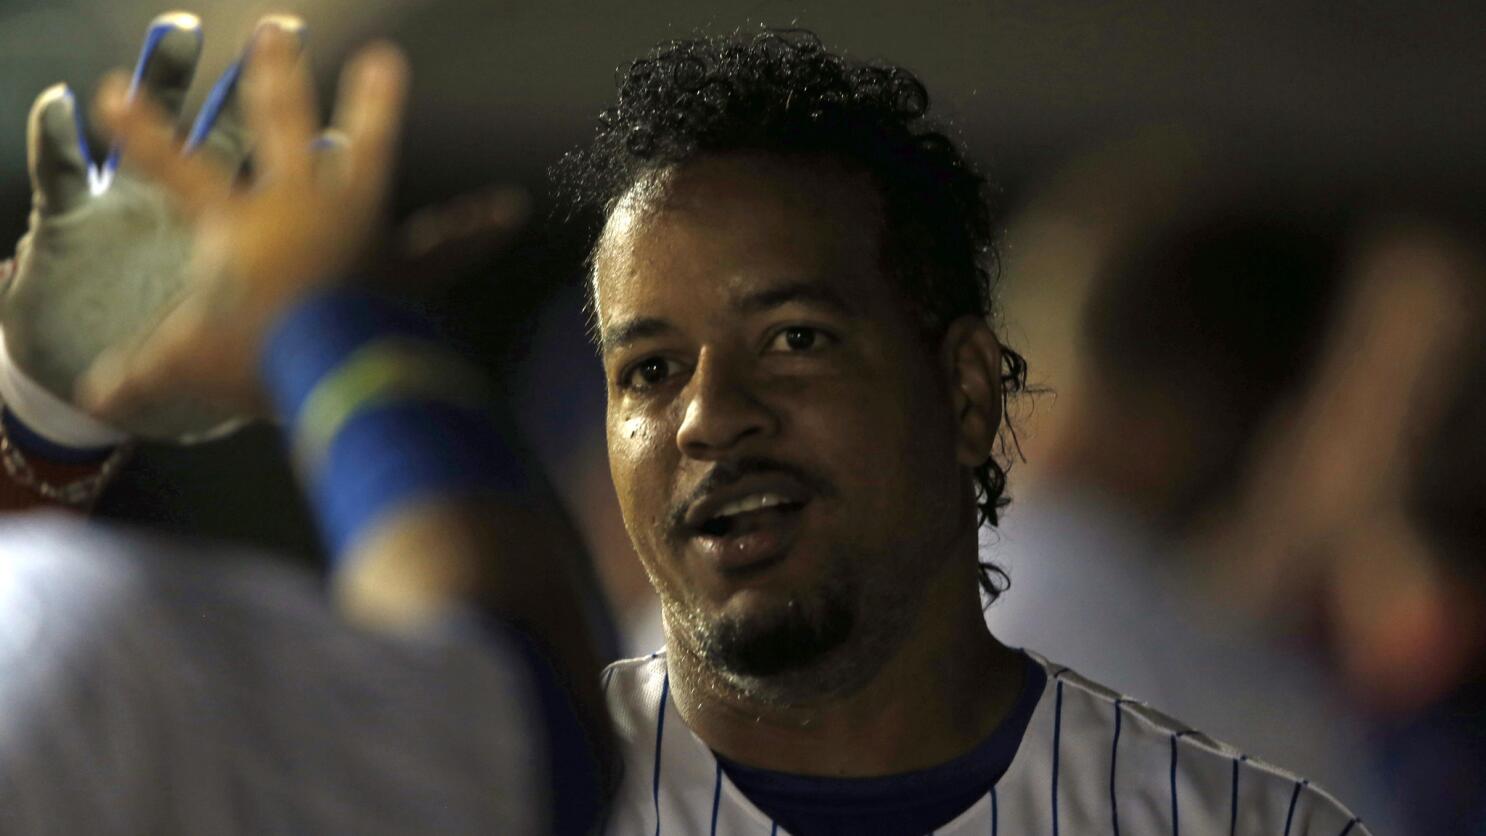 The Rays found these long-lost Manny Ramirez bobbleheads, and one